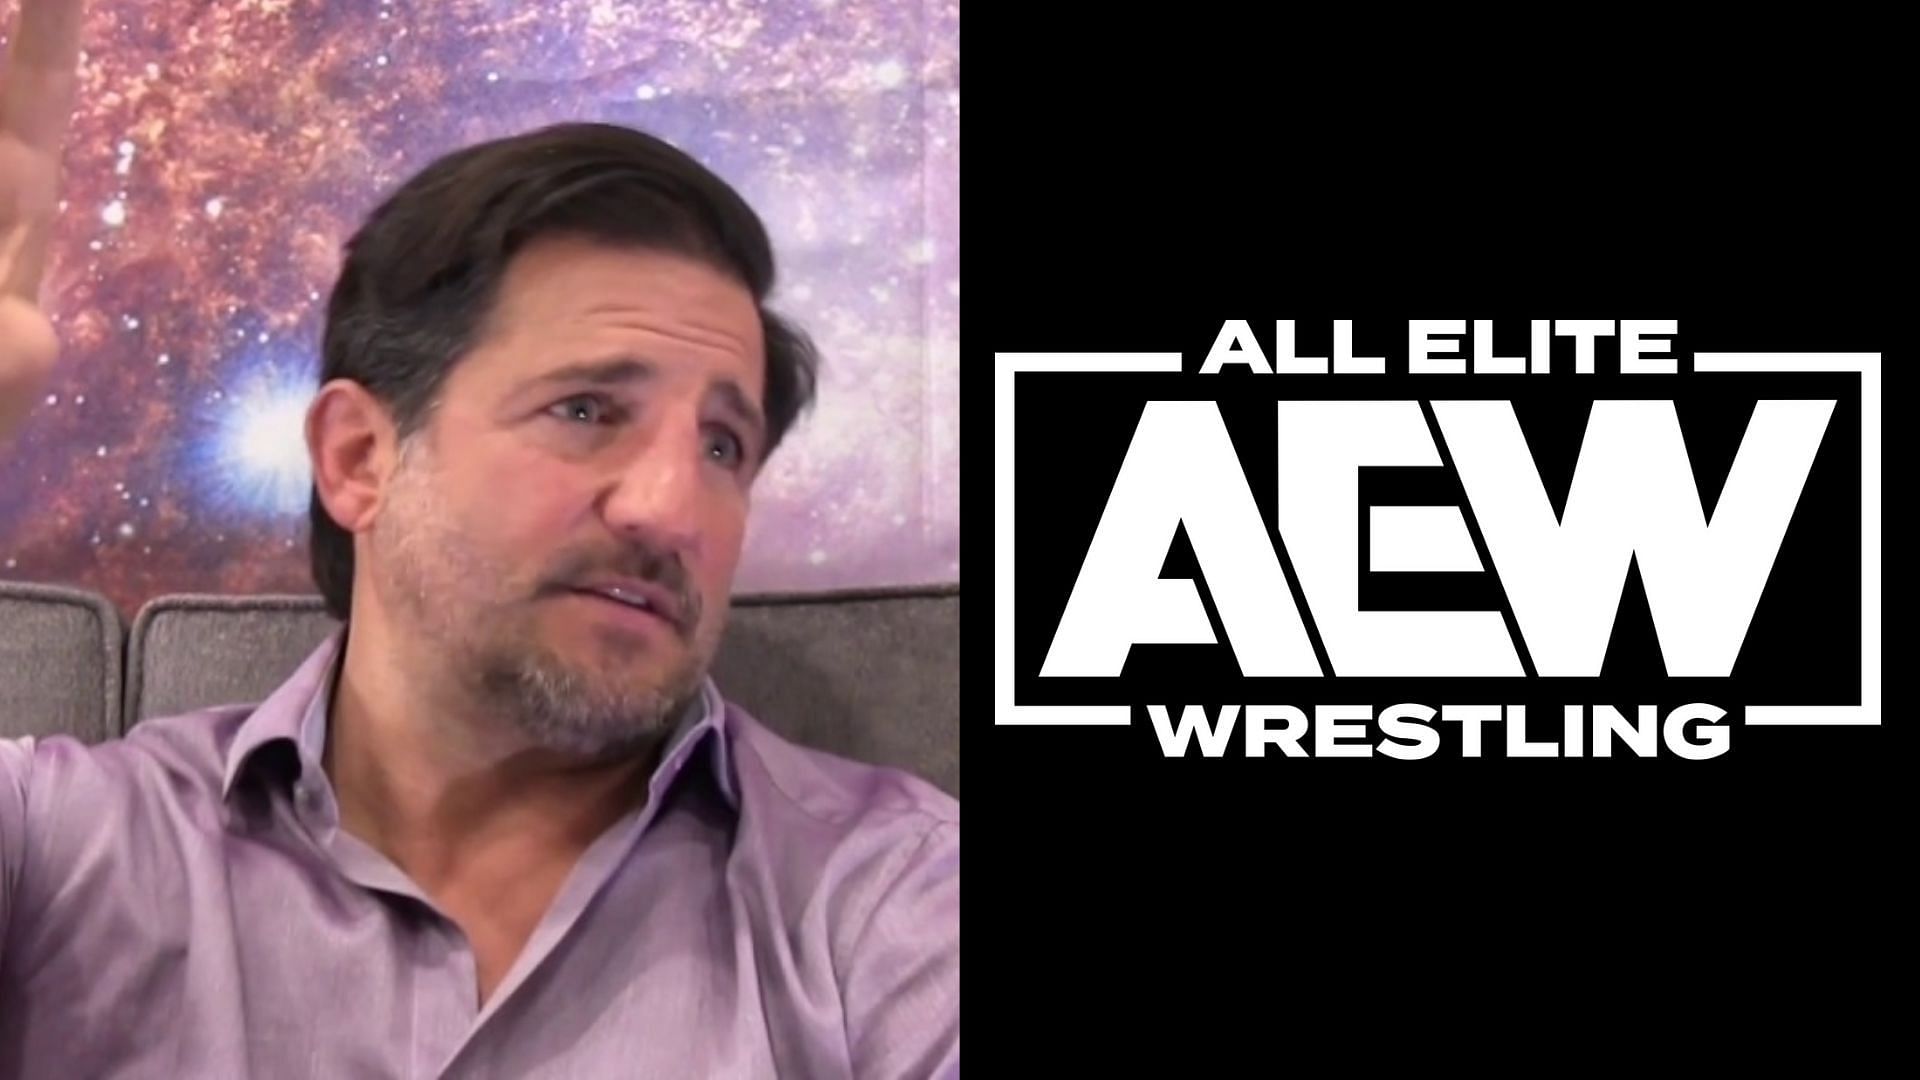 Would this AEW star appeal to a larger audience if he makes these changes?